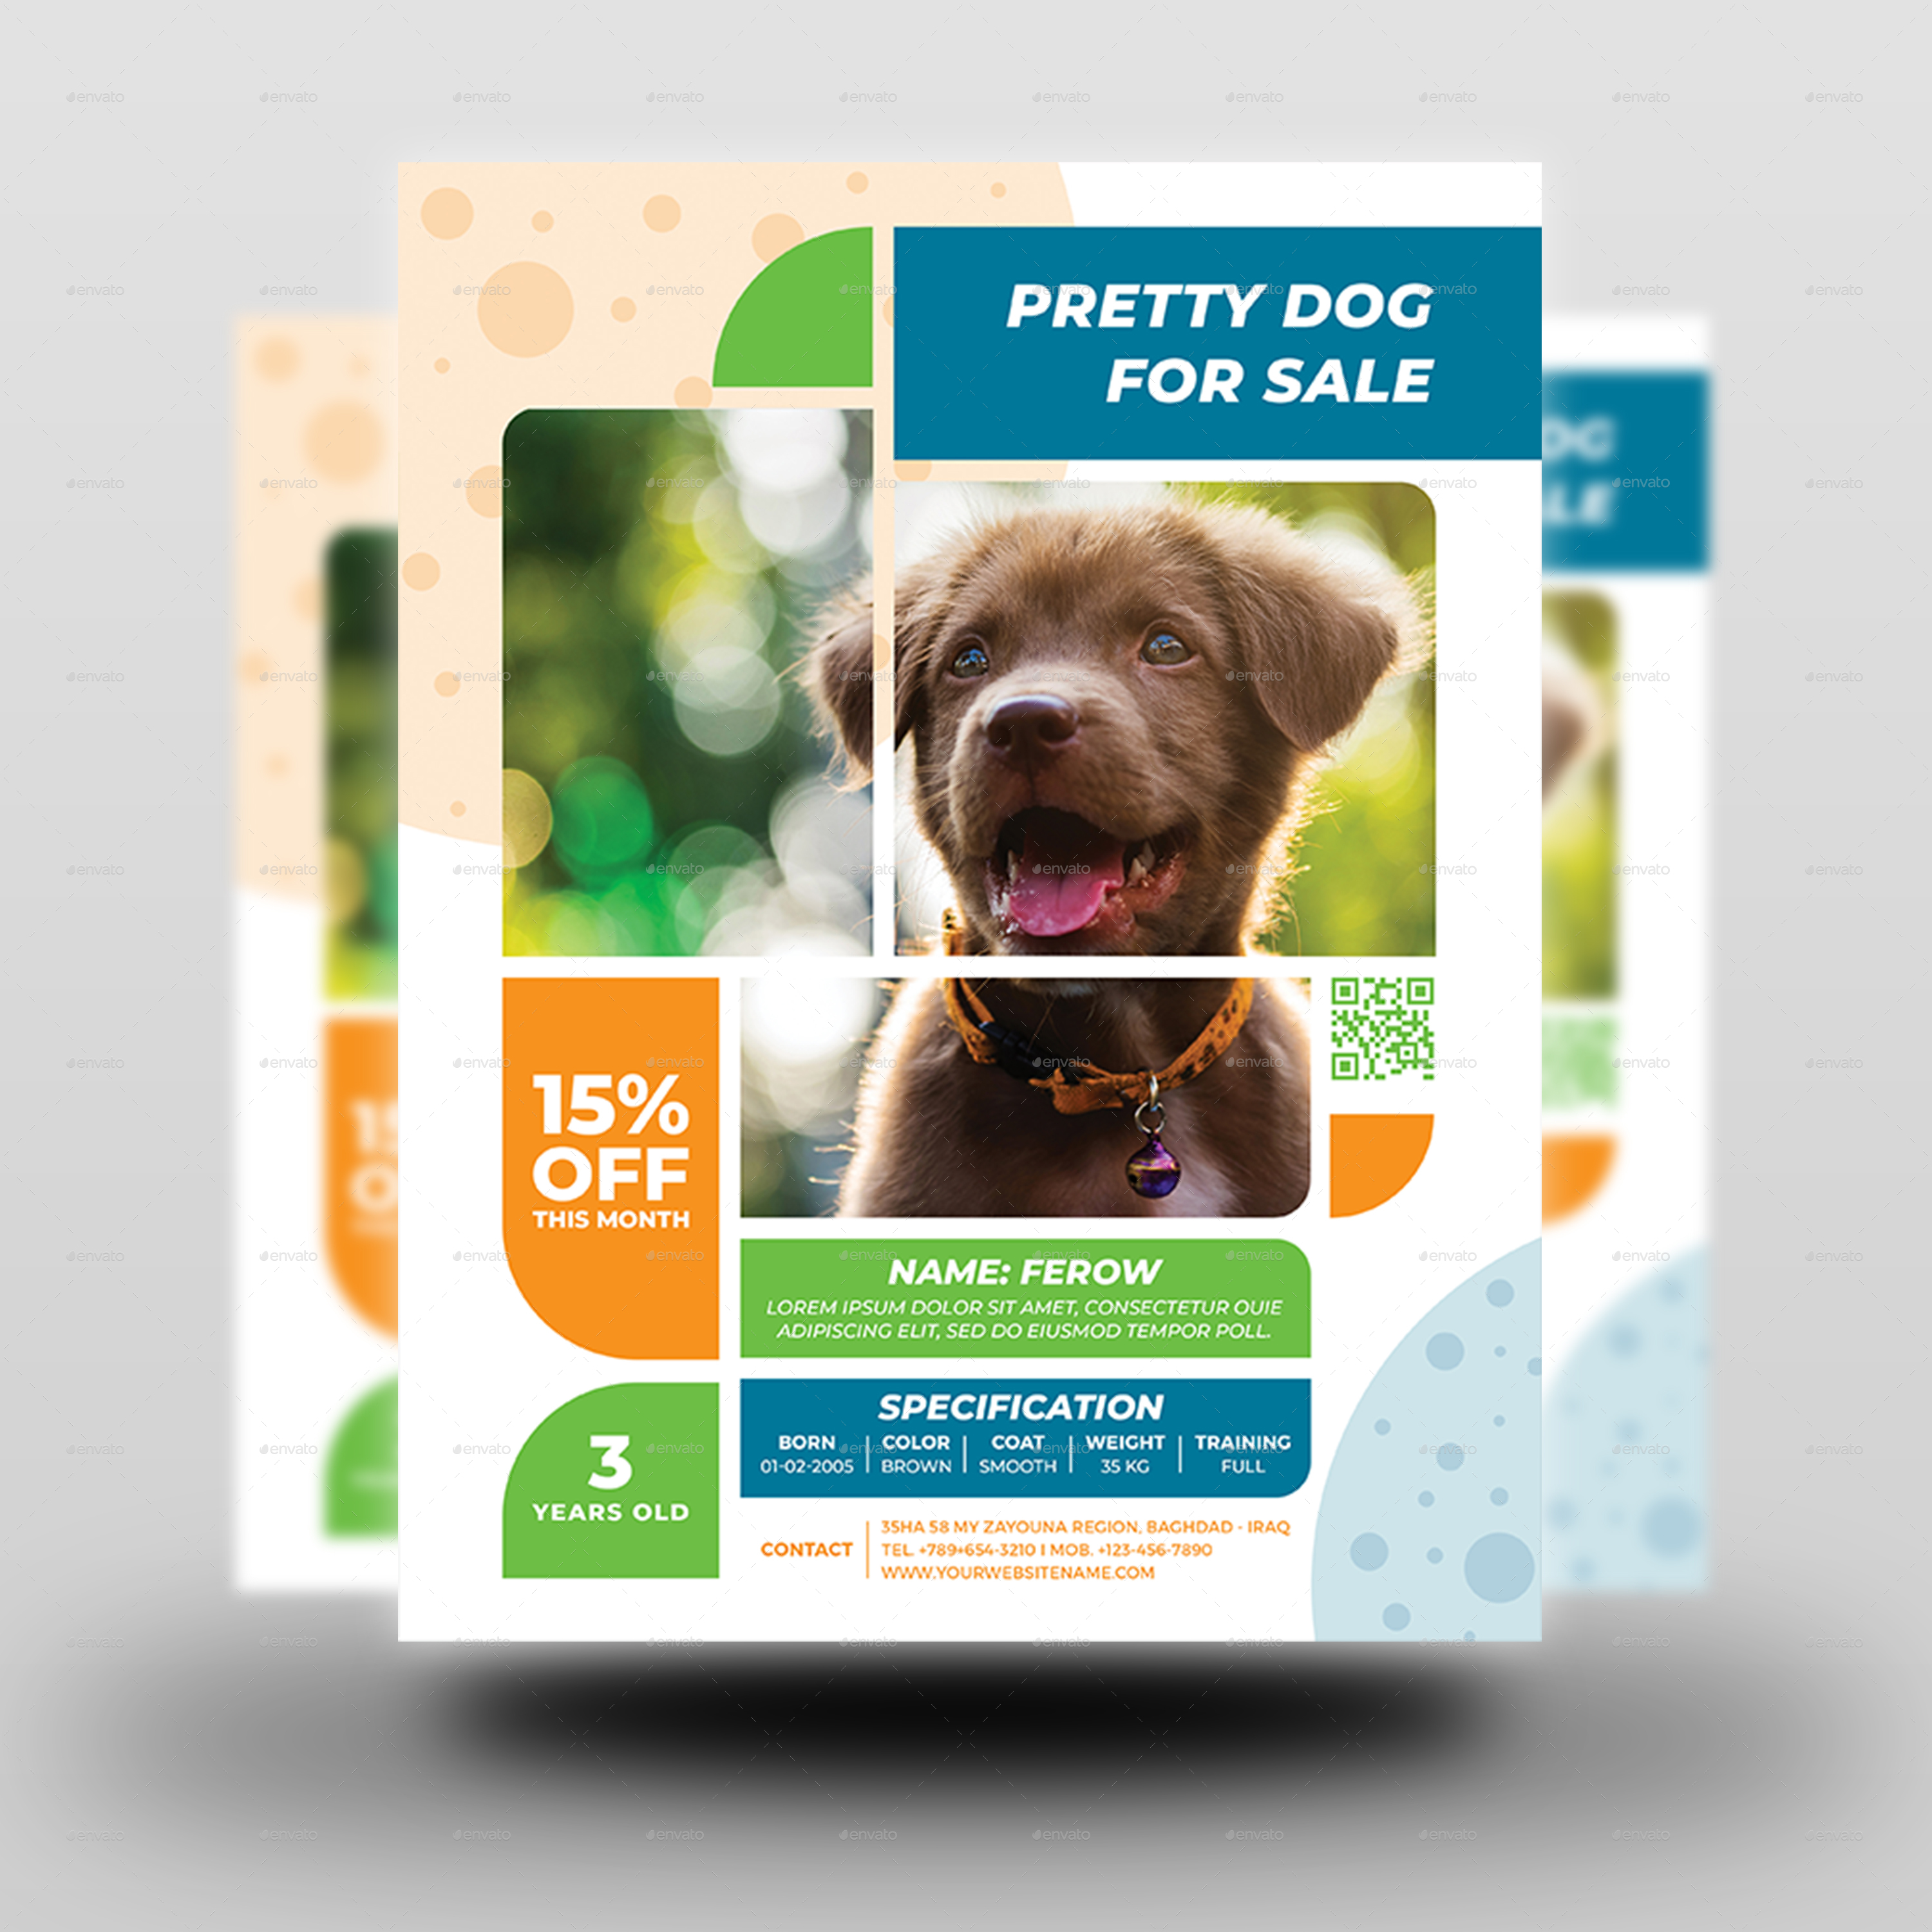 Pets for Sale Flyer Template by OWPictures  GraphicRiver Throughout Puppy For Sale Flyer Templates